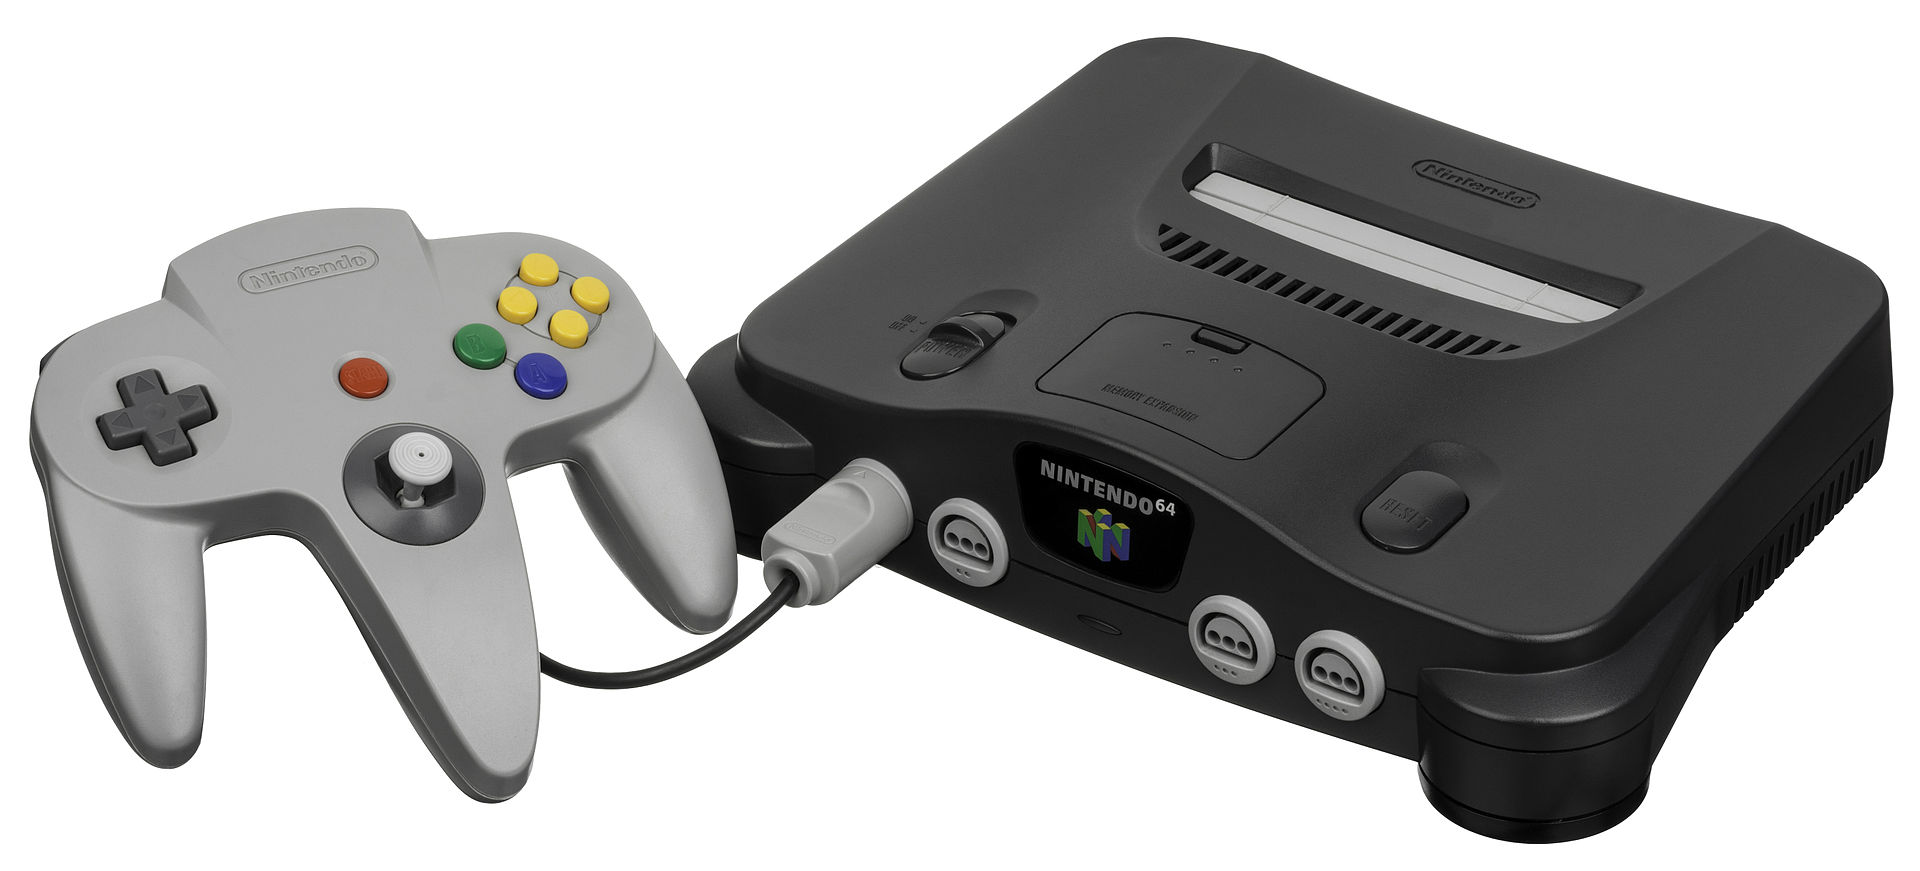 Nintendo N64 Games roms, games and ISOs to download for free